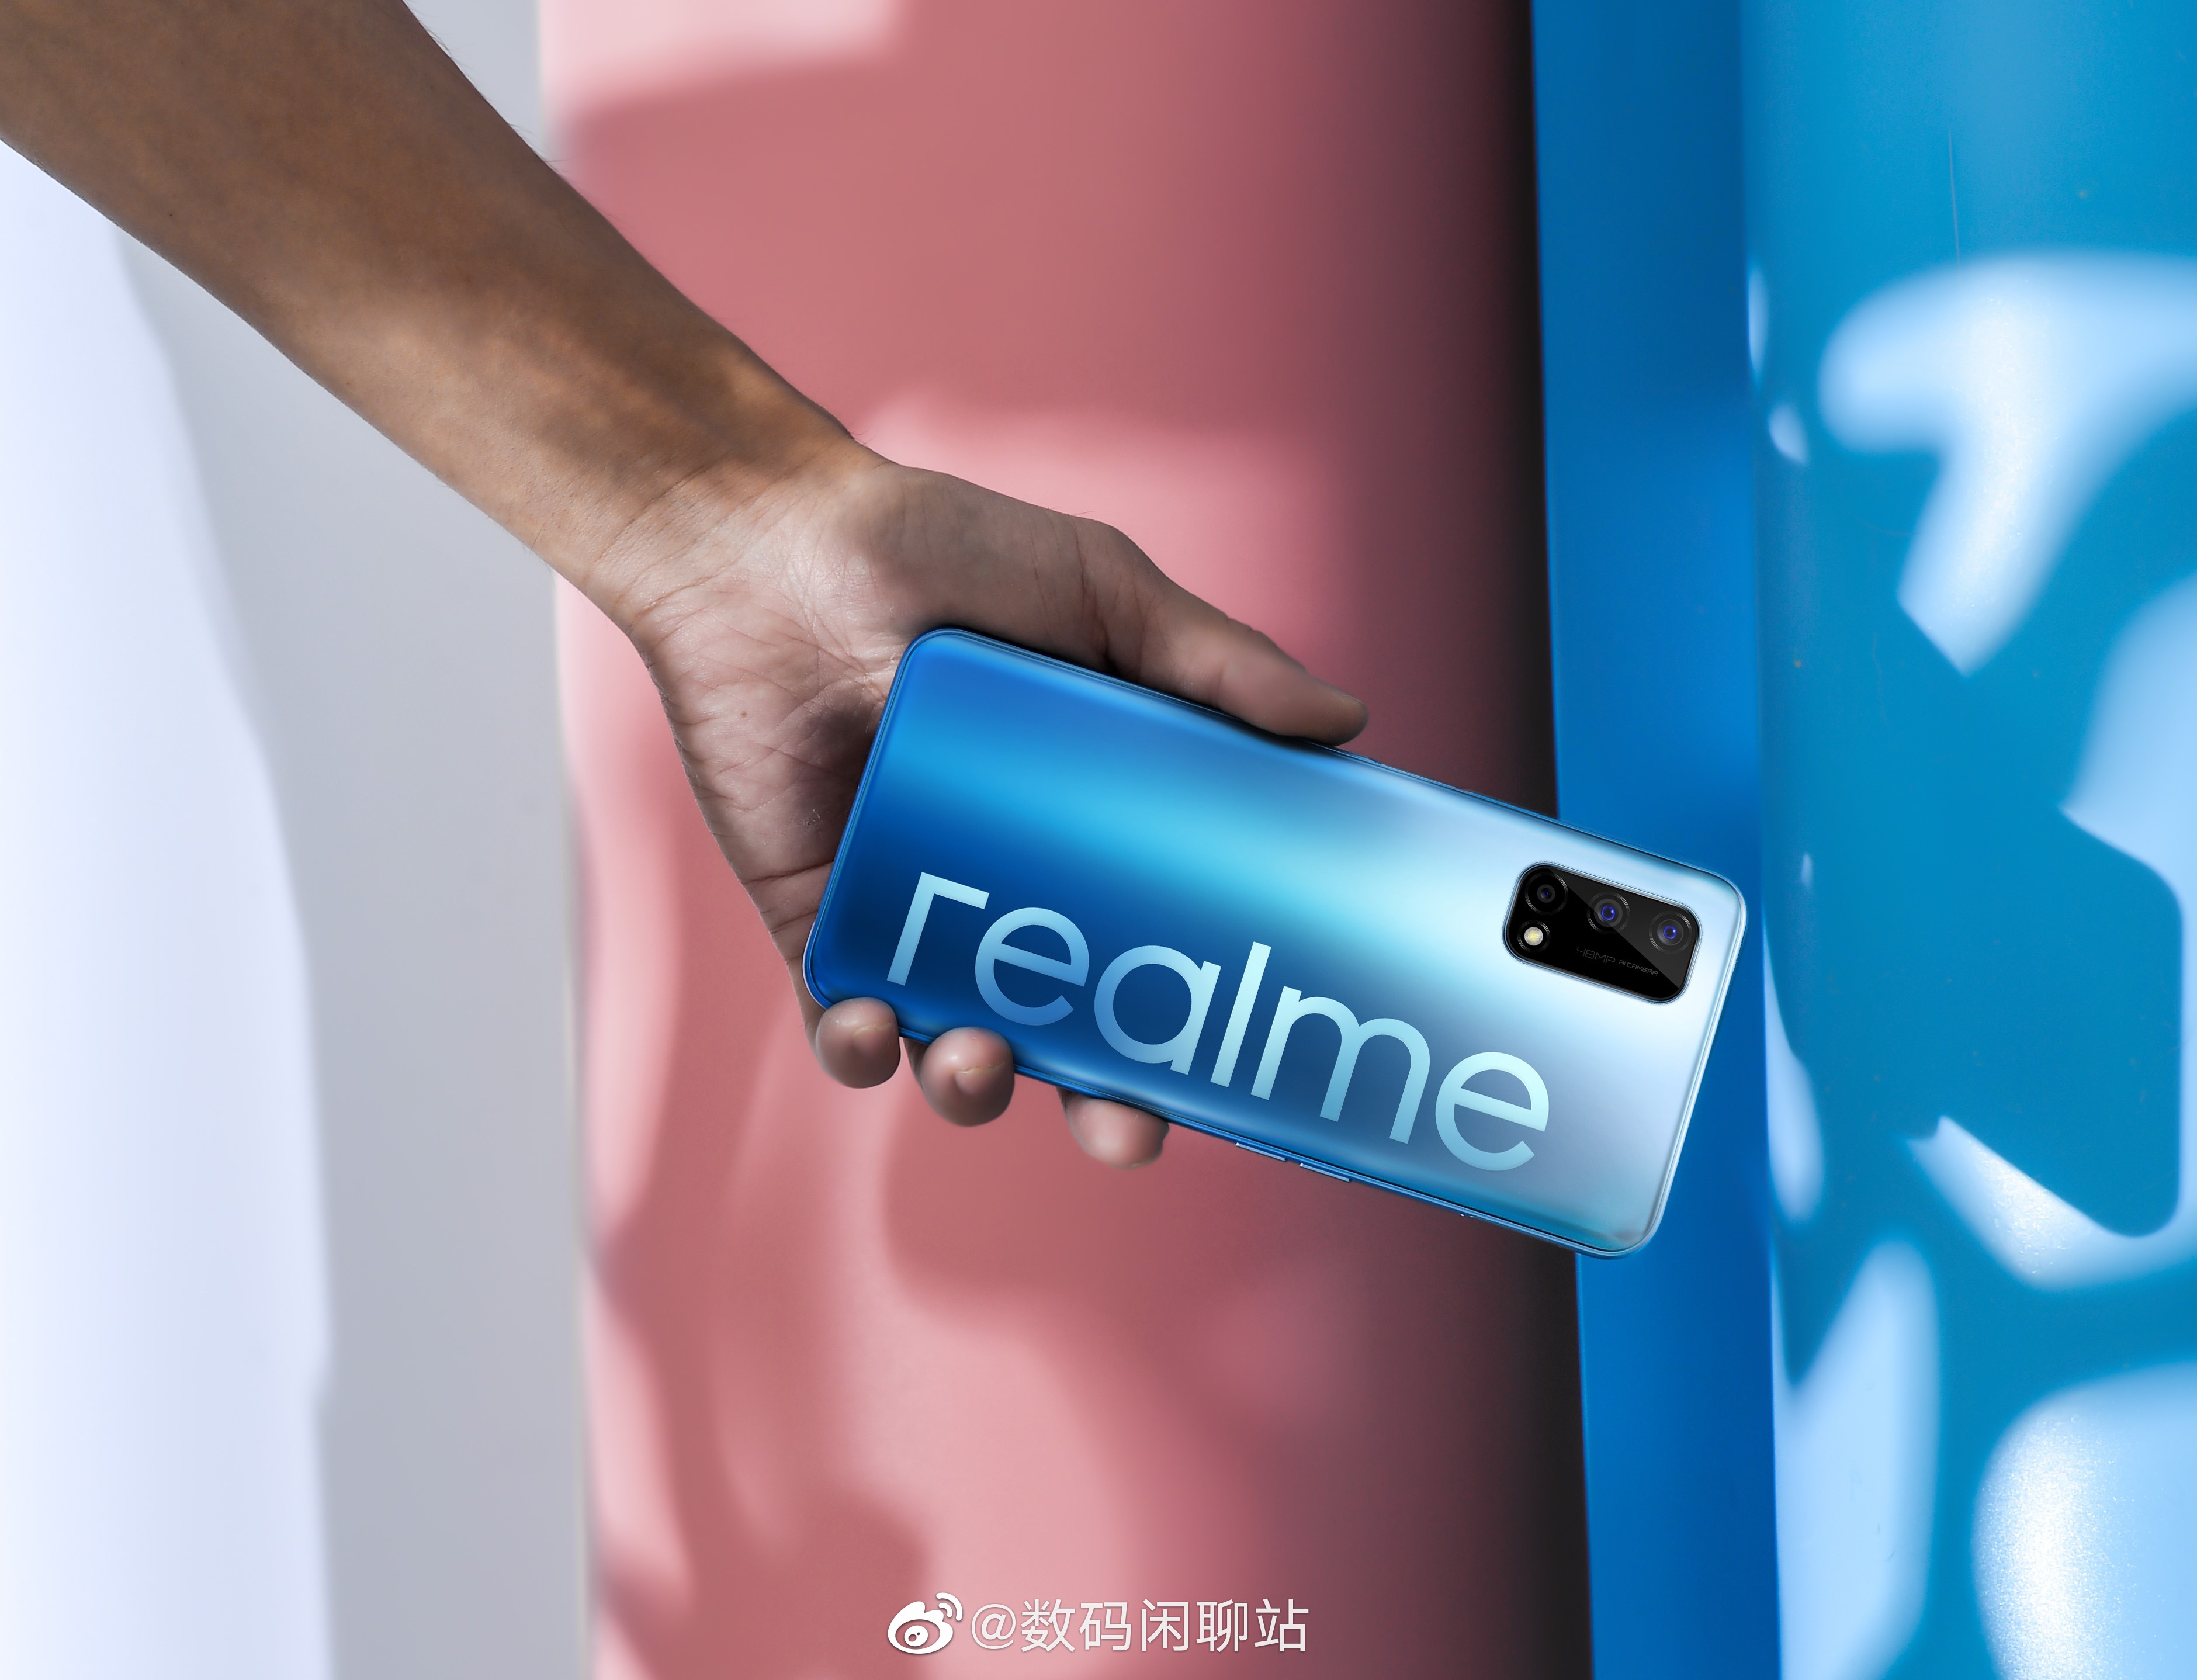 Realme Q2 key details leaked a day ahead of official launch